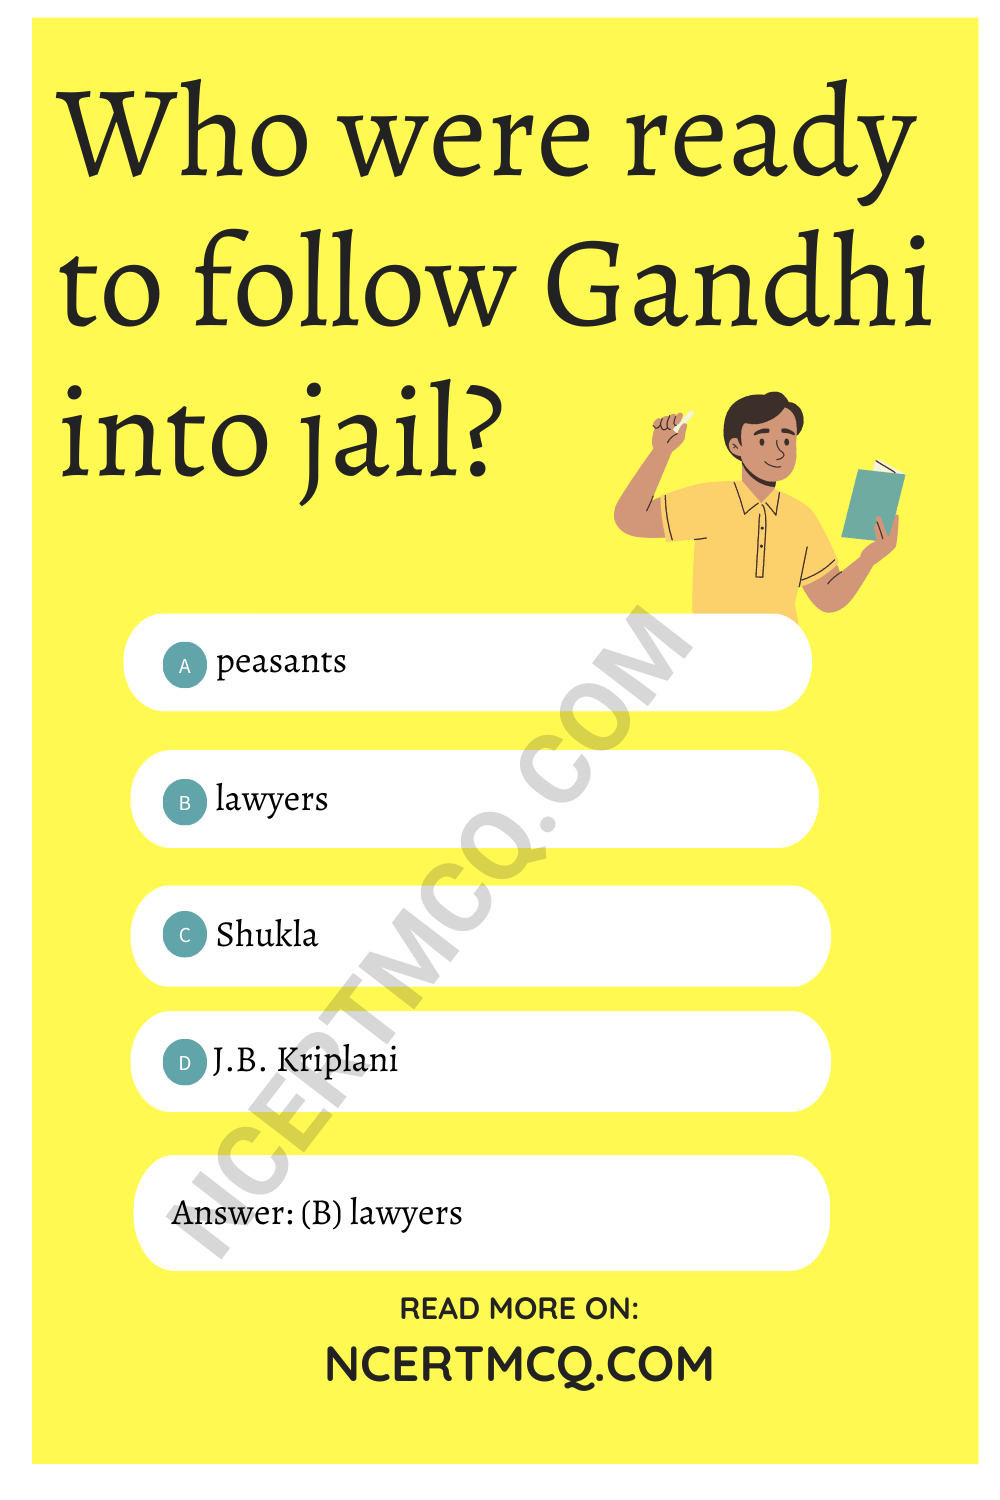 Who were ready to follow Gandhi into jail?